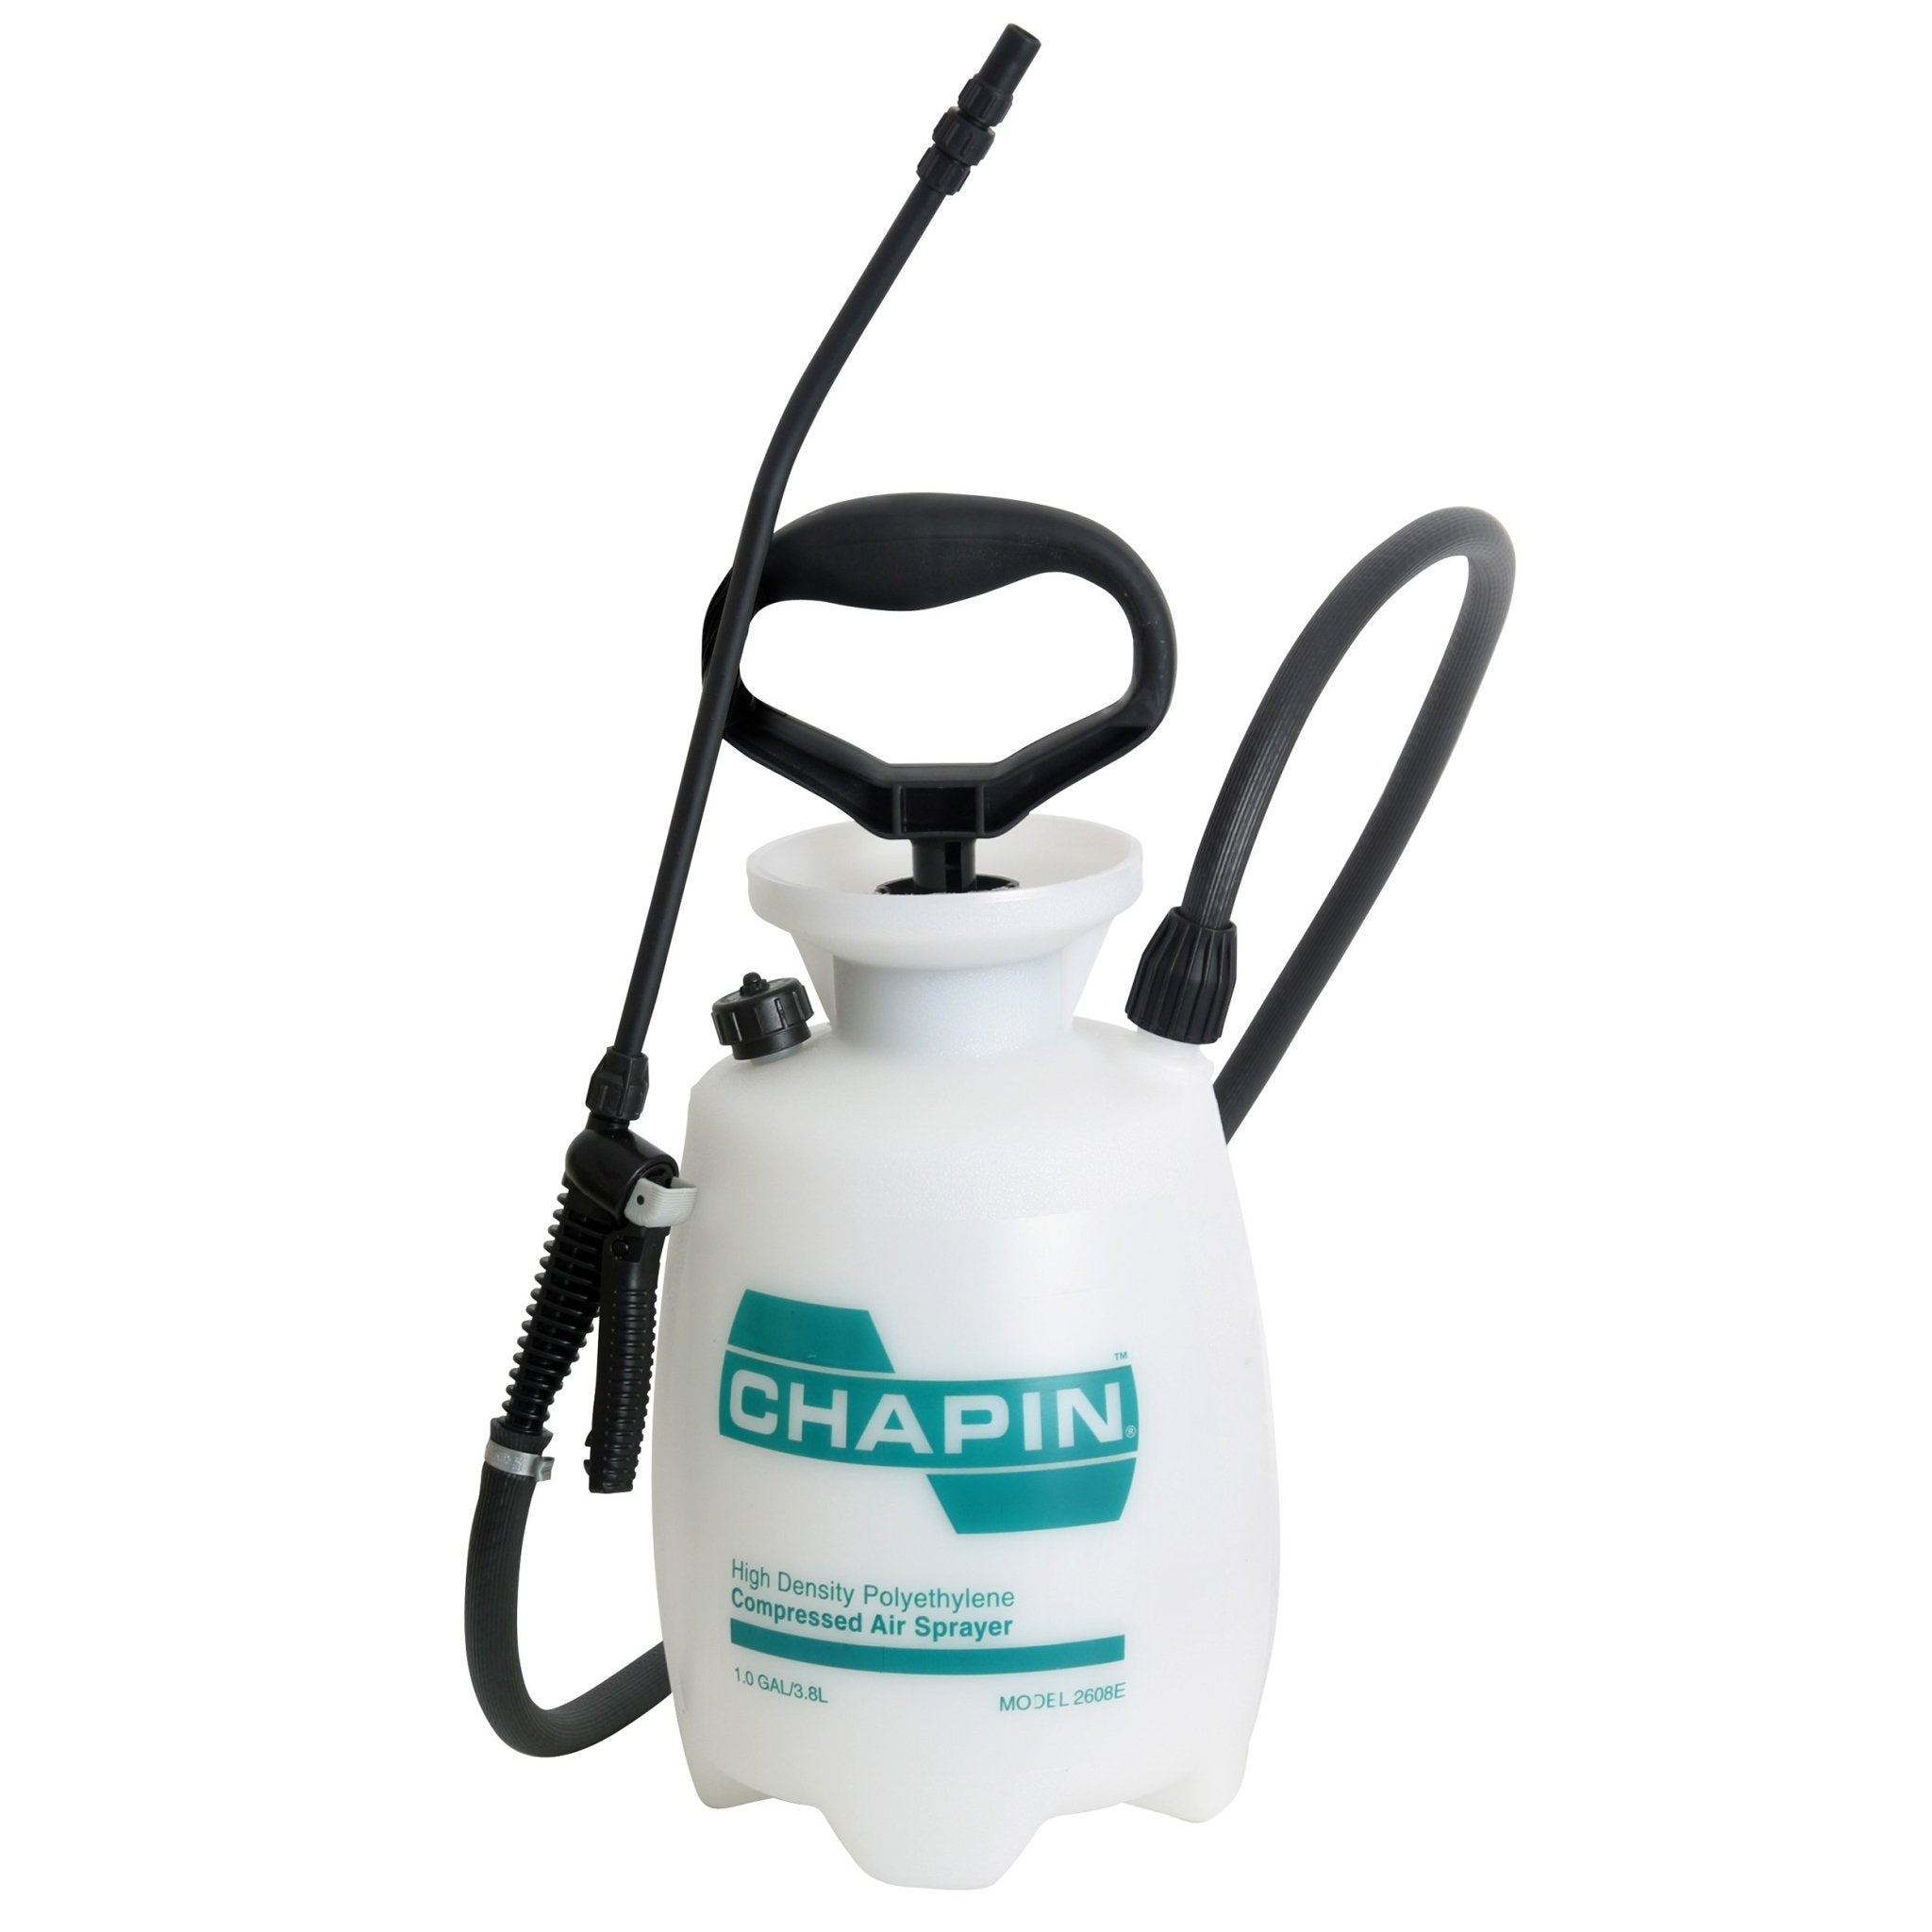 Chapin 2608E Industrial Janitorial / Sanitation Sprayer, 3.8 litres